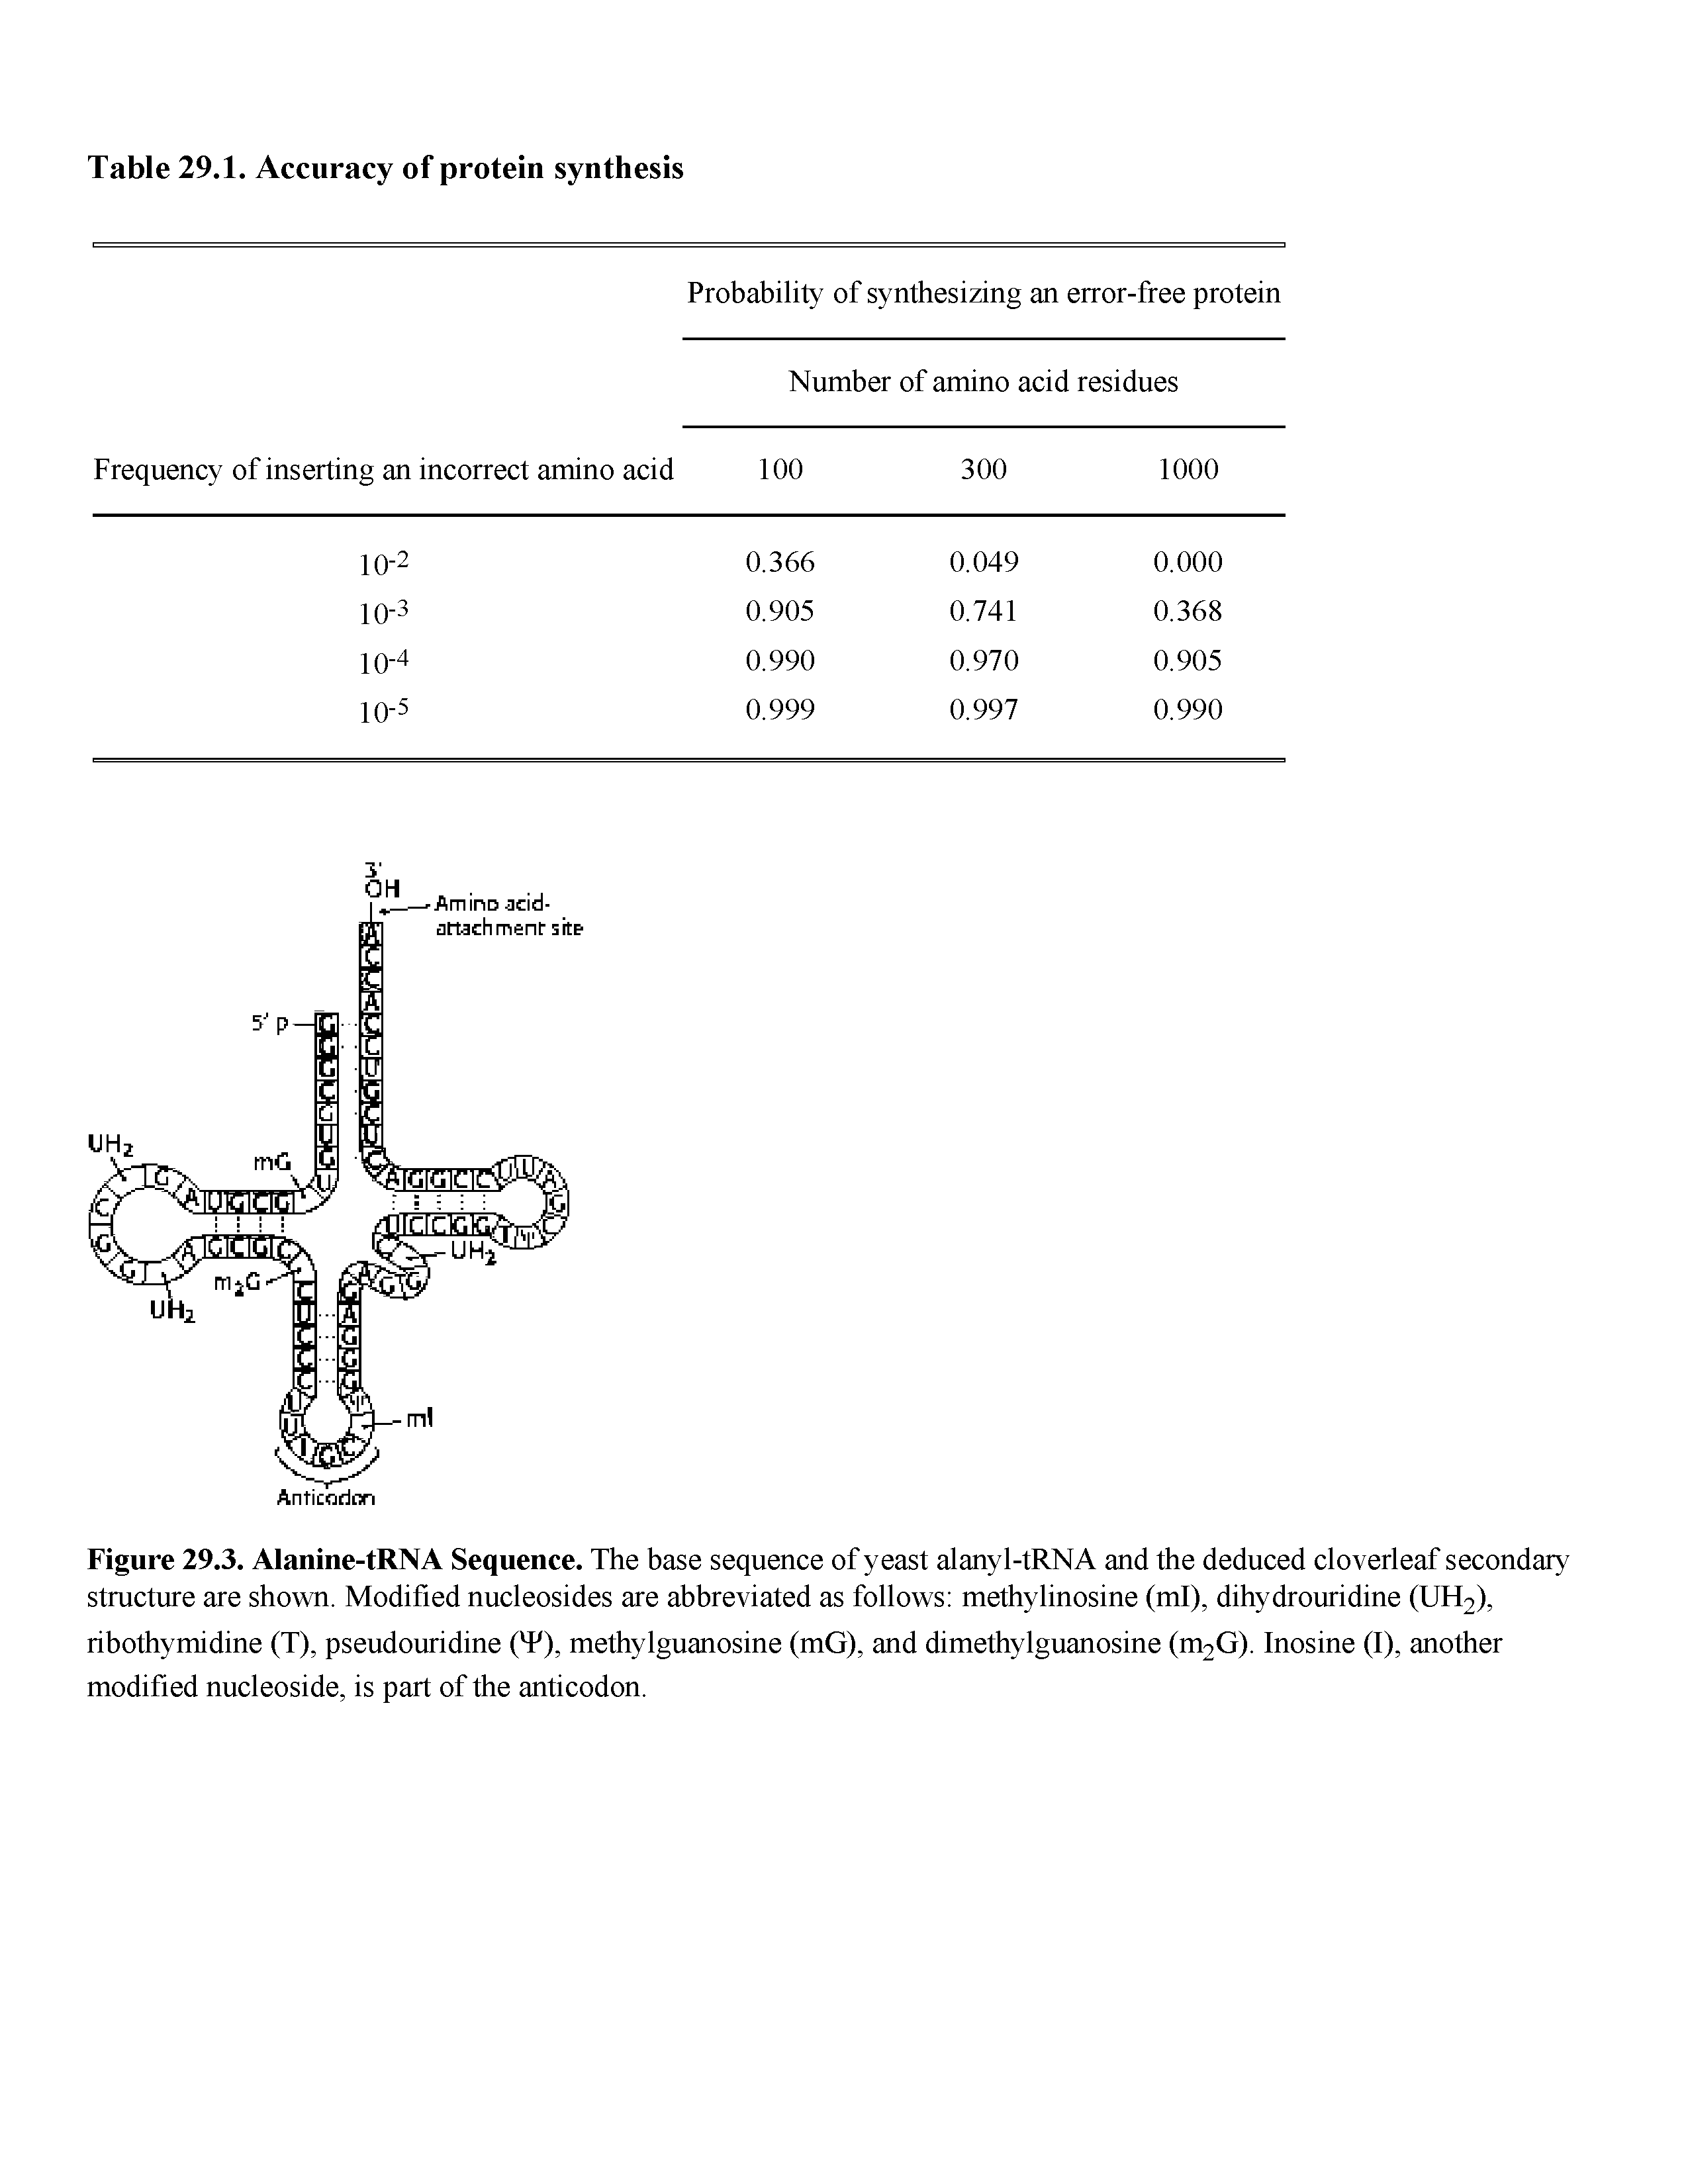 Figure 29.3. Alanine-tRNA Sequence. The base sequence of yeast alanyl-tRNA and the deduced cloverleaf secondary structure are shown. Modified nucleosides are abbreviated as follows methylinosine (ml), dihydrouridine (UH2),...